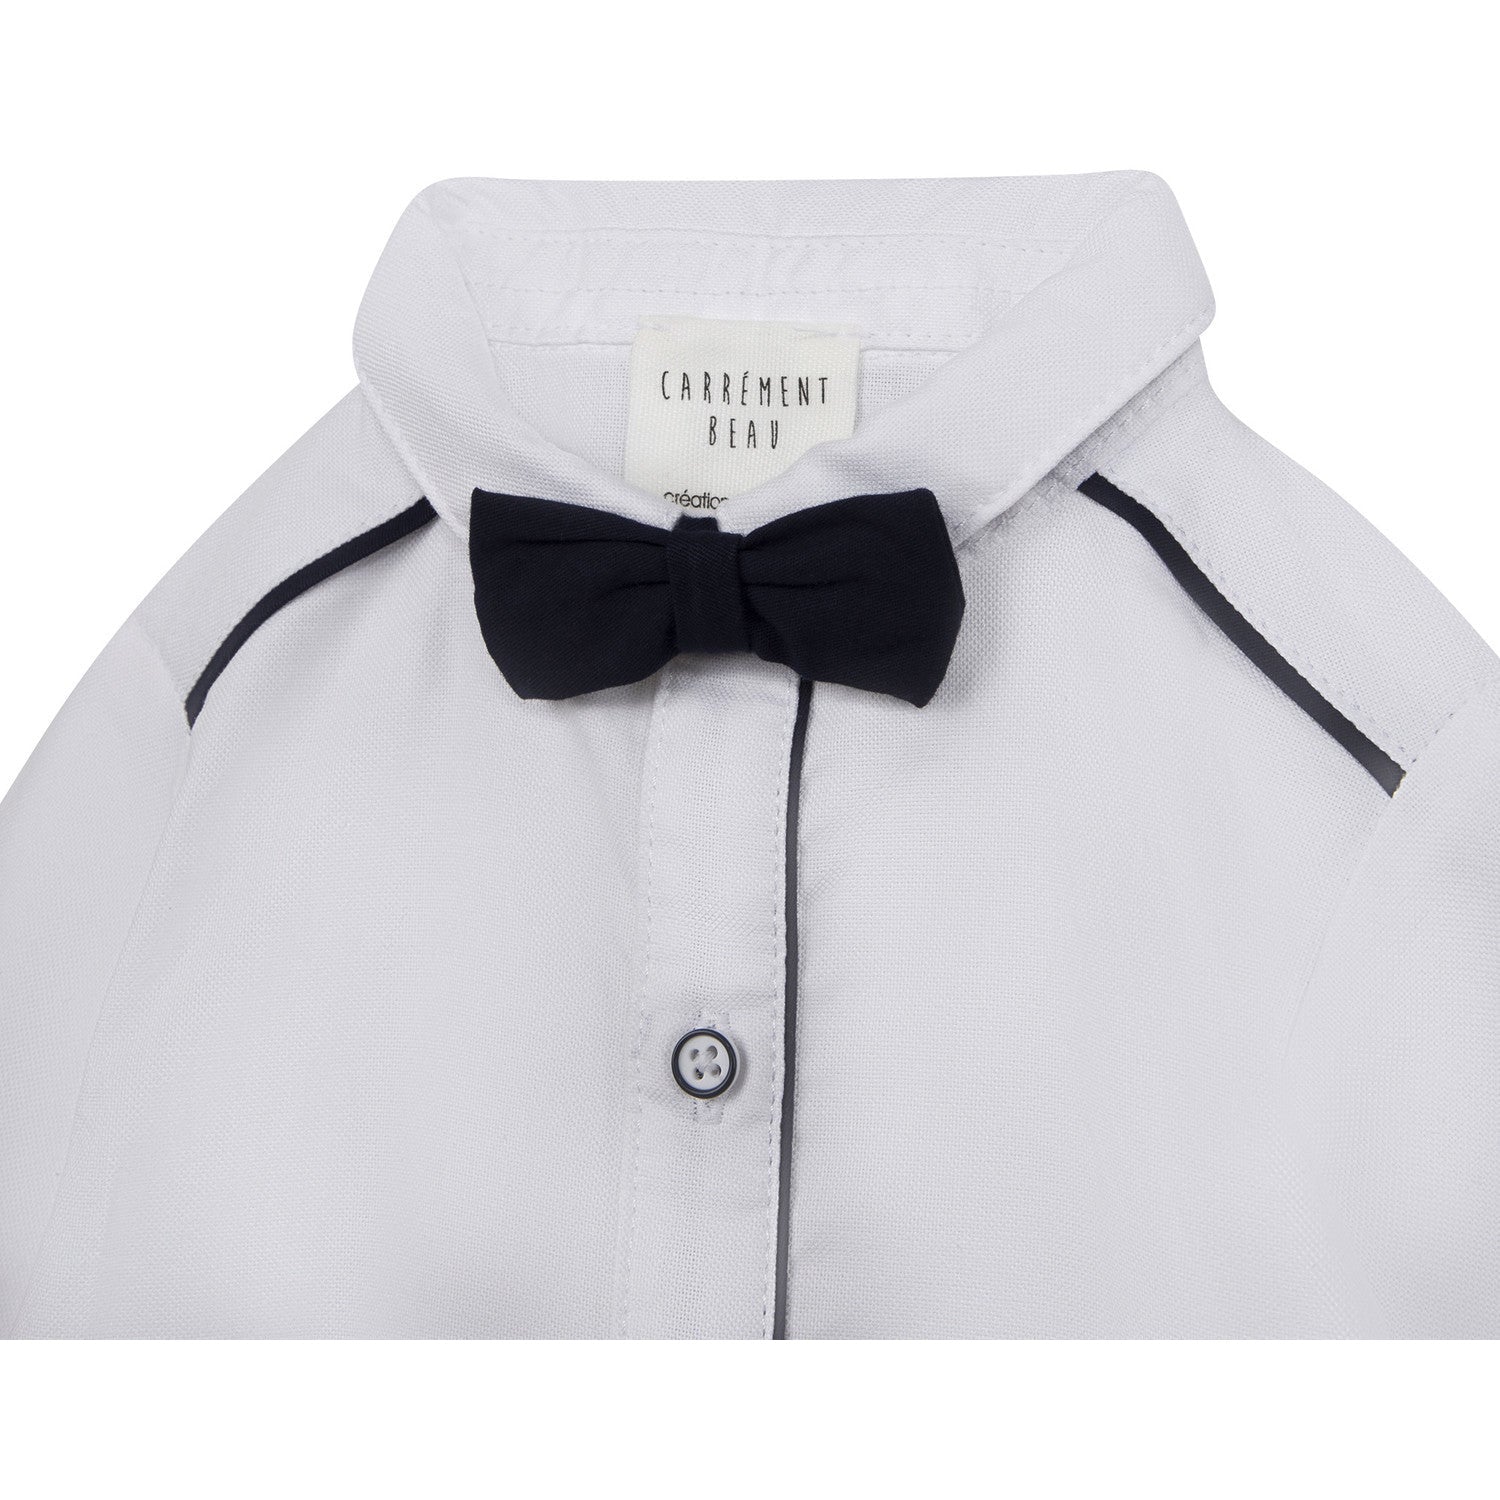 BOW TIE BUTTON UP SHIRT